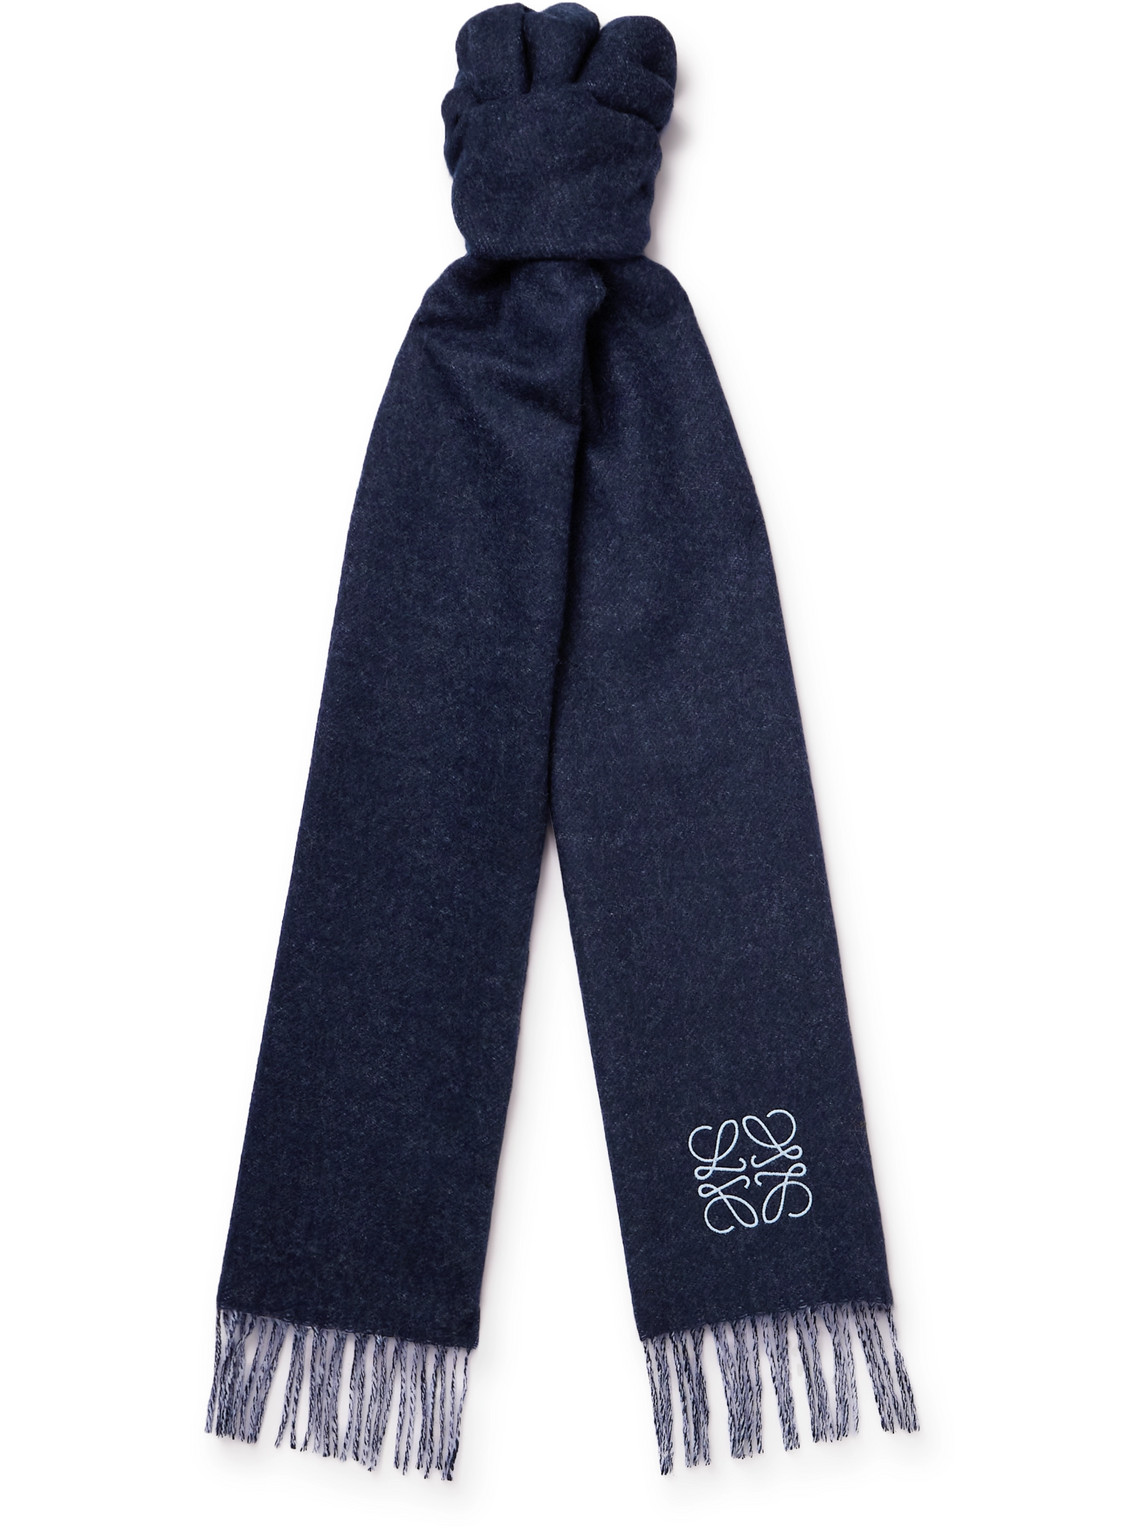 Loewe Fringed Logo-embroidered Two-tone Wool And Cashmere-blend Scarf In Light Blue/navy Blue